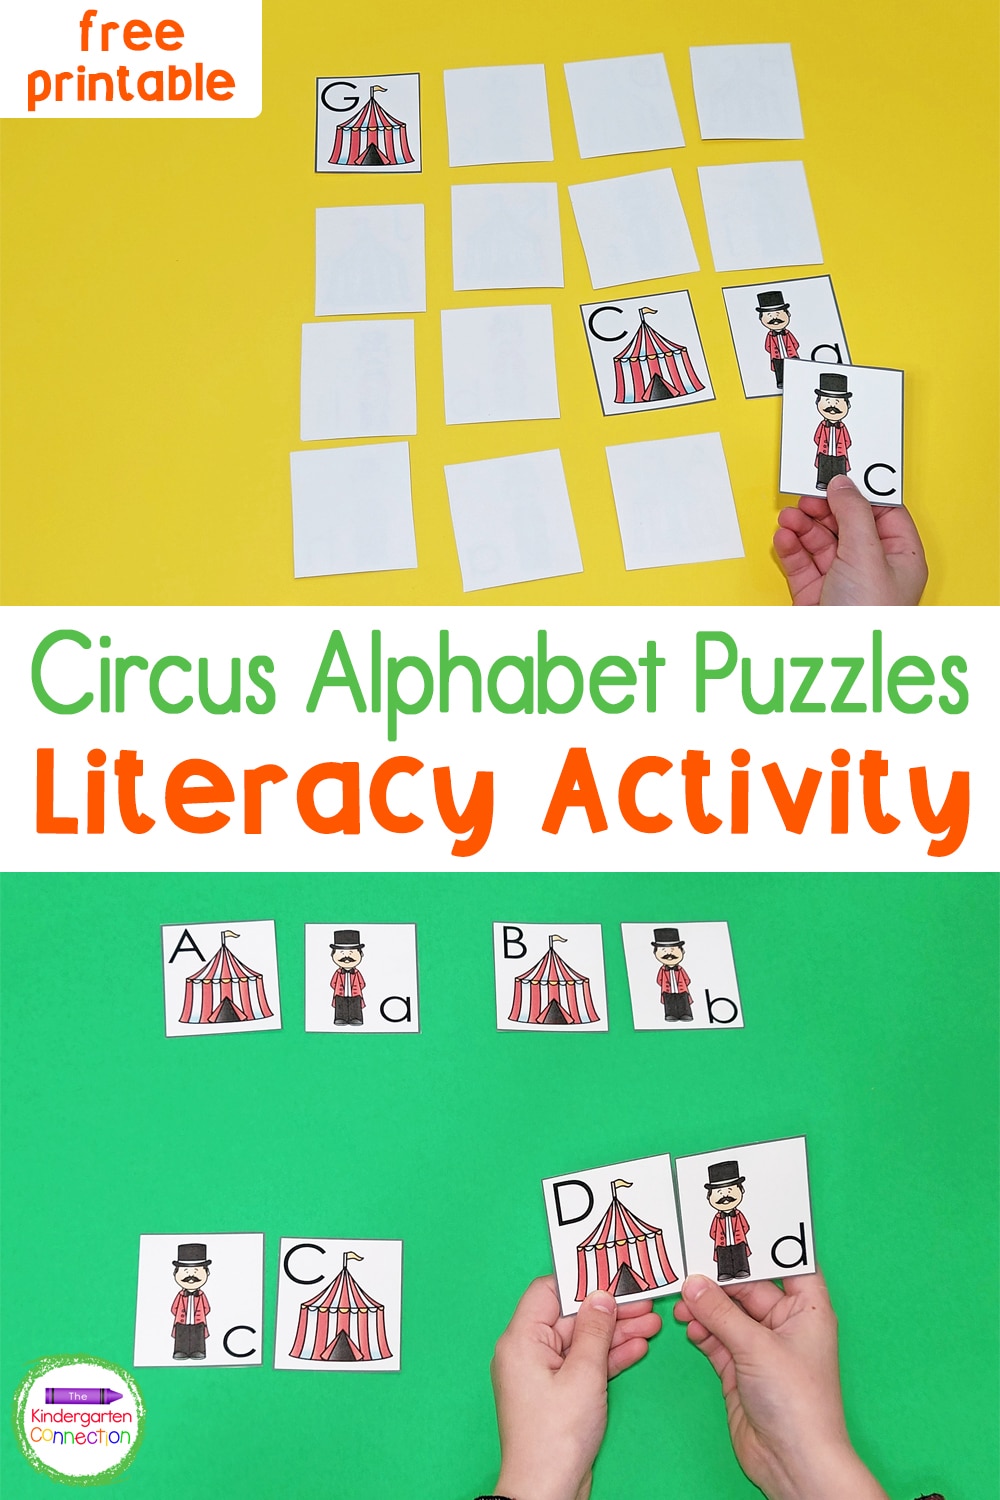 These free printable Circus Alphabet Puzzles are great for letter recognition and as a Pre-K or Kindergarten literacy center!